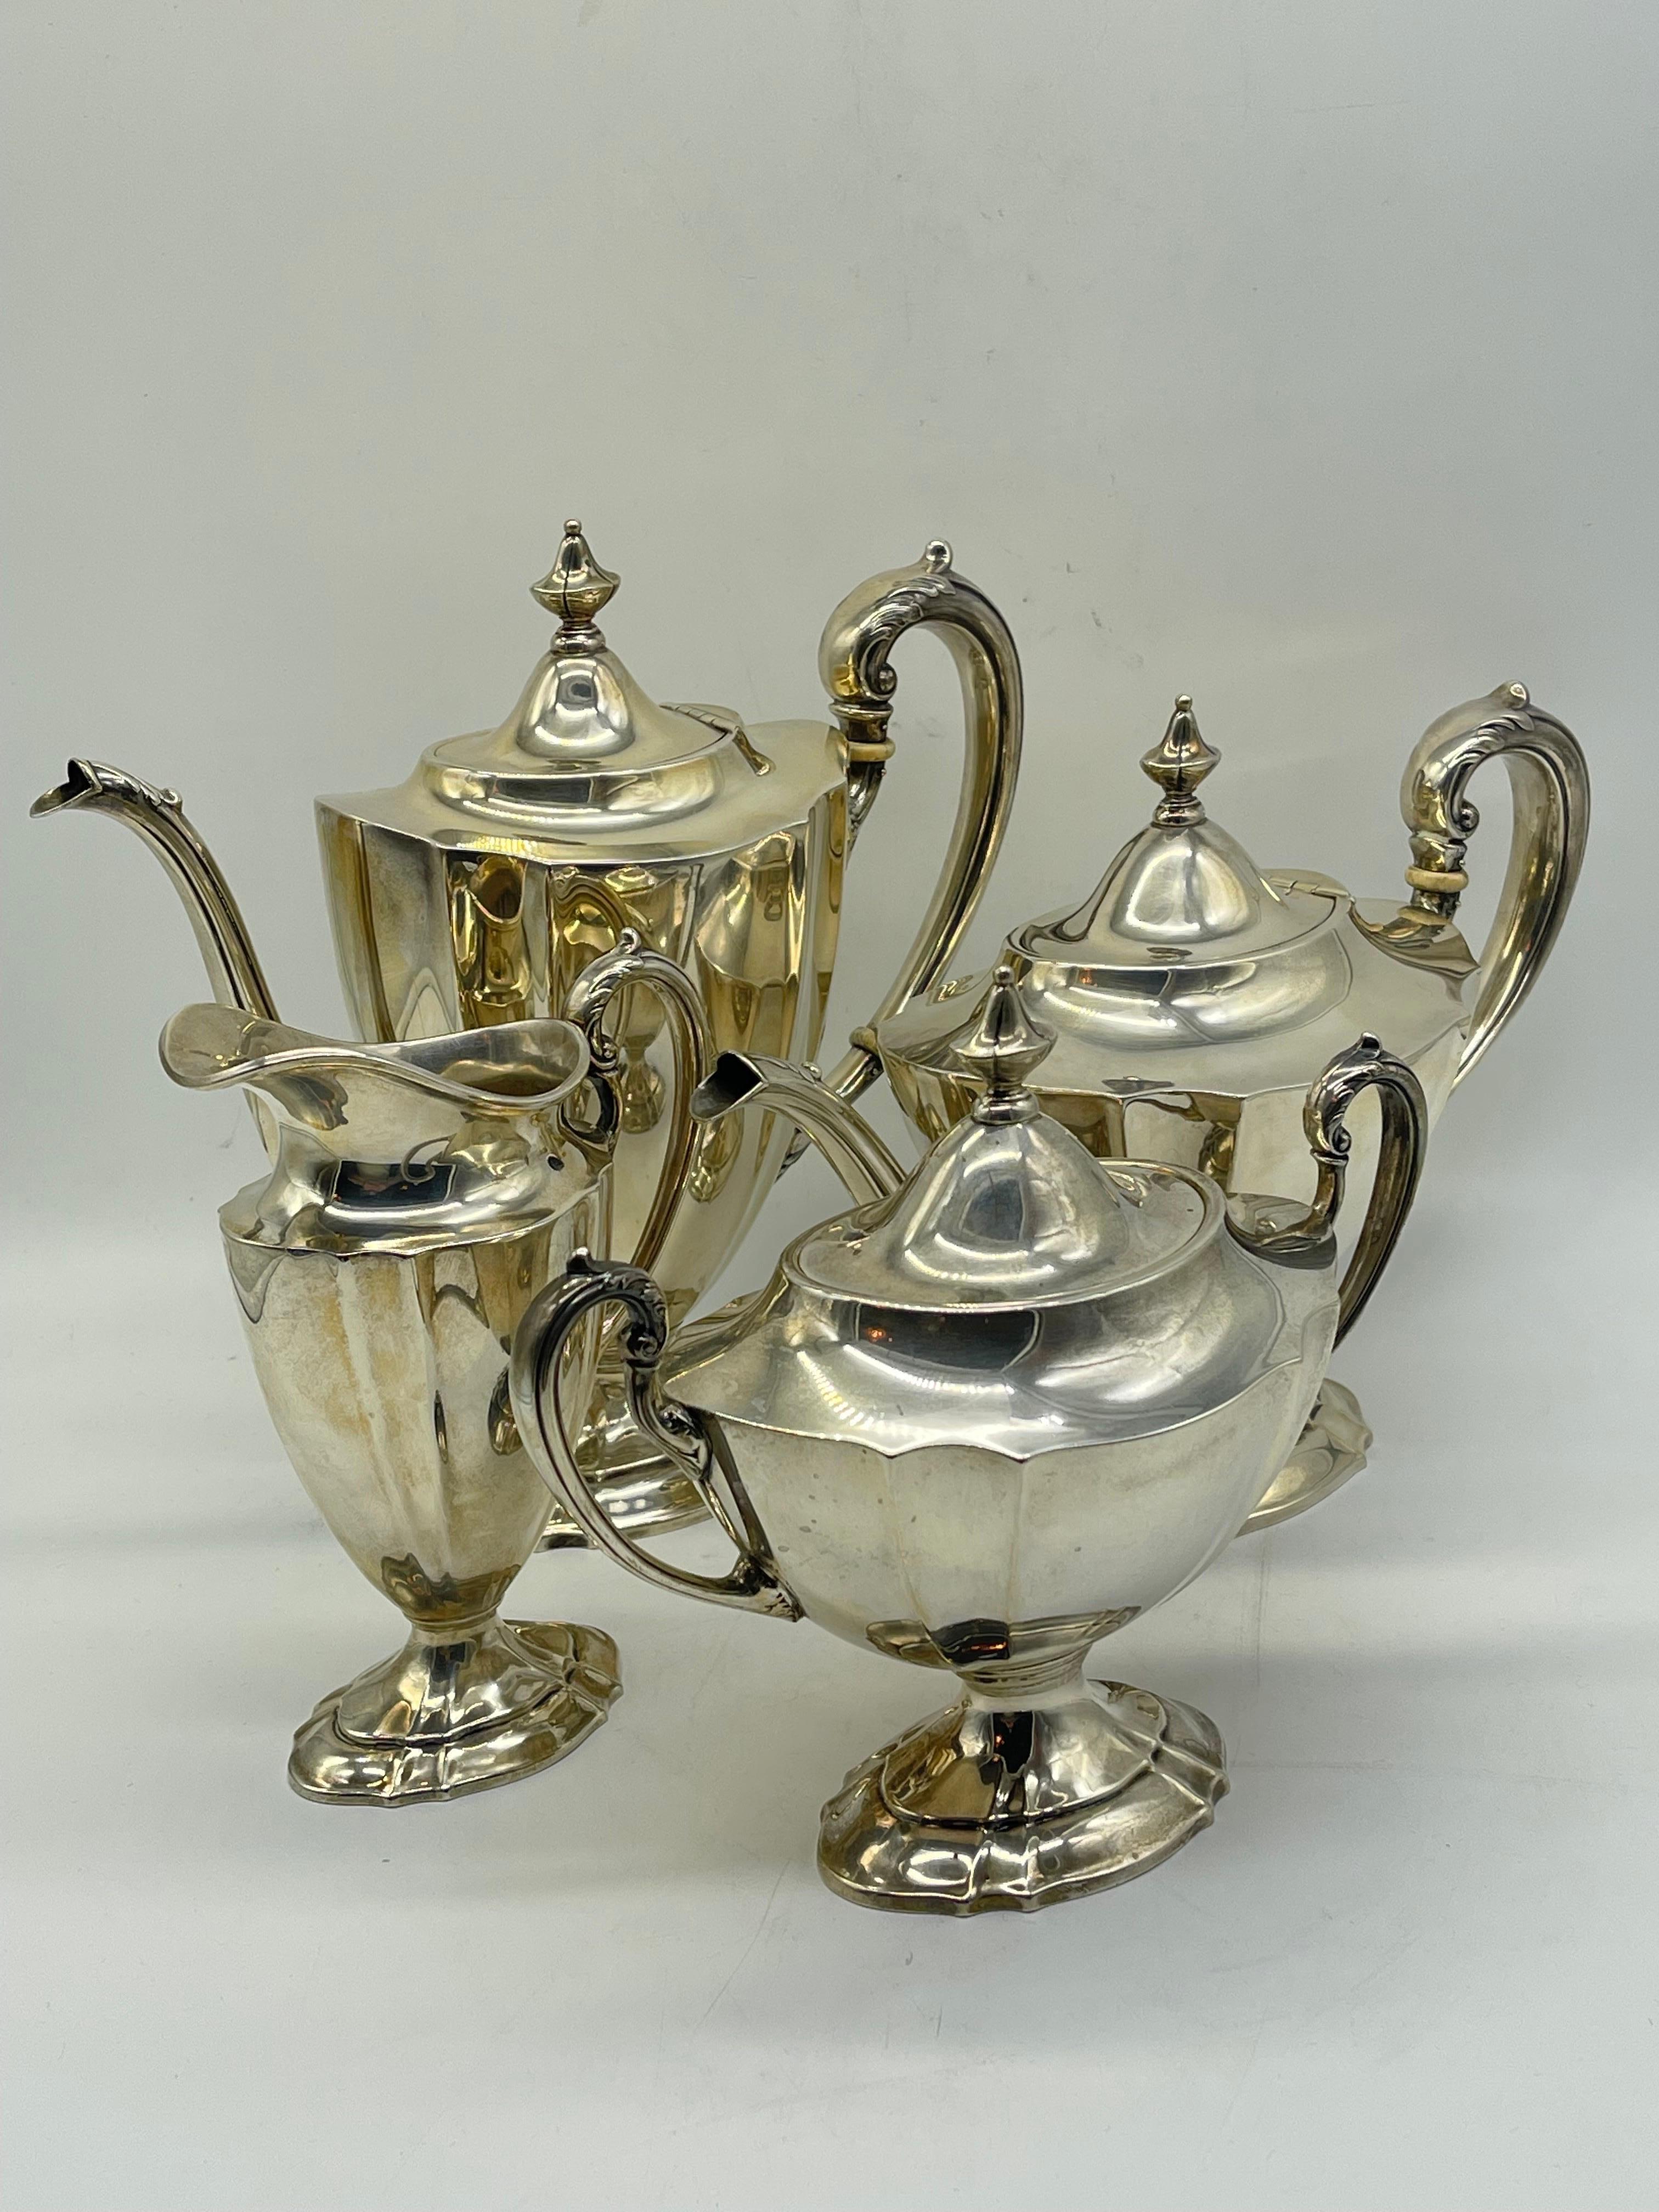 Wonderful Antique Silver Coffee & Tea Centerpiece - Classicism / Empire 

International Sterling Silver - probably from England

Coffee Pot 
height 24 cm, depth 10 cm, width 26 cm

Tea Pot 
height 20 cm, depth 13 cm,  width 29 cm

Sugar Box 
height